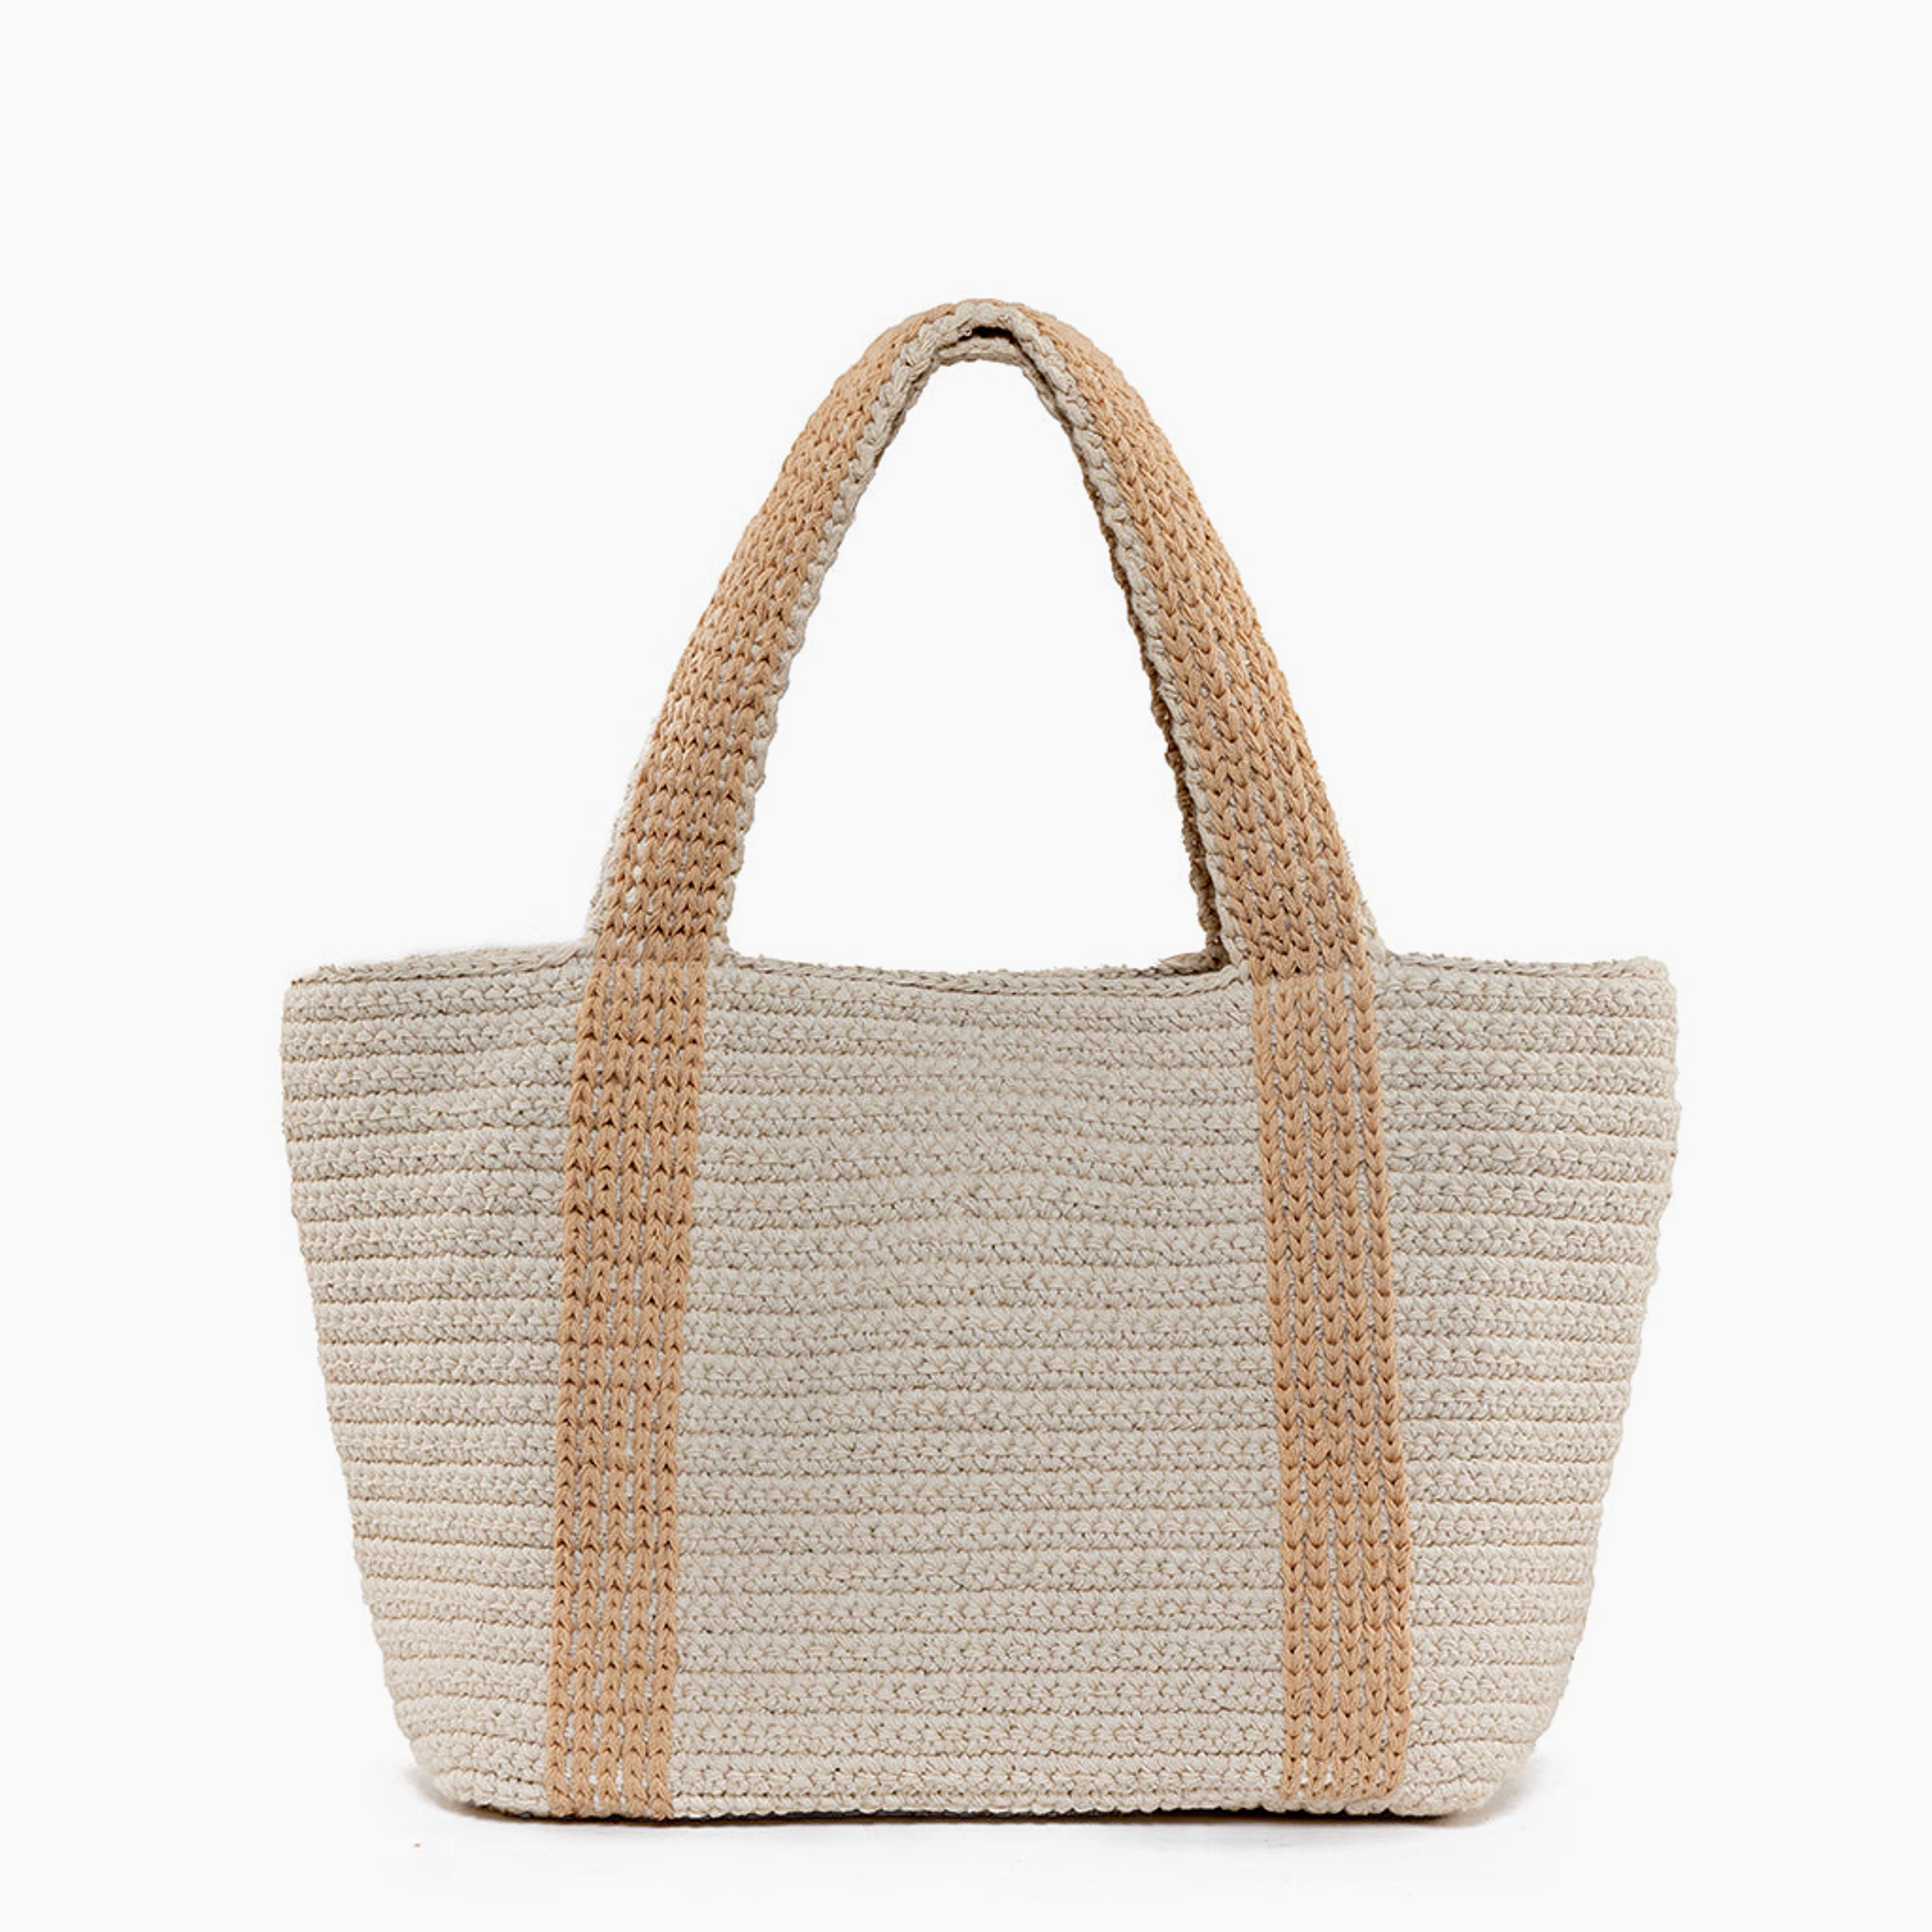 Madeline Crochet Tote Natural/Tan